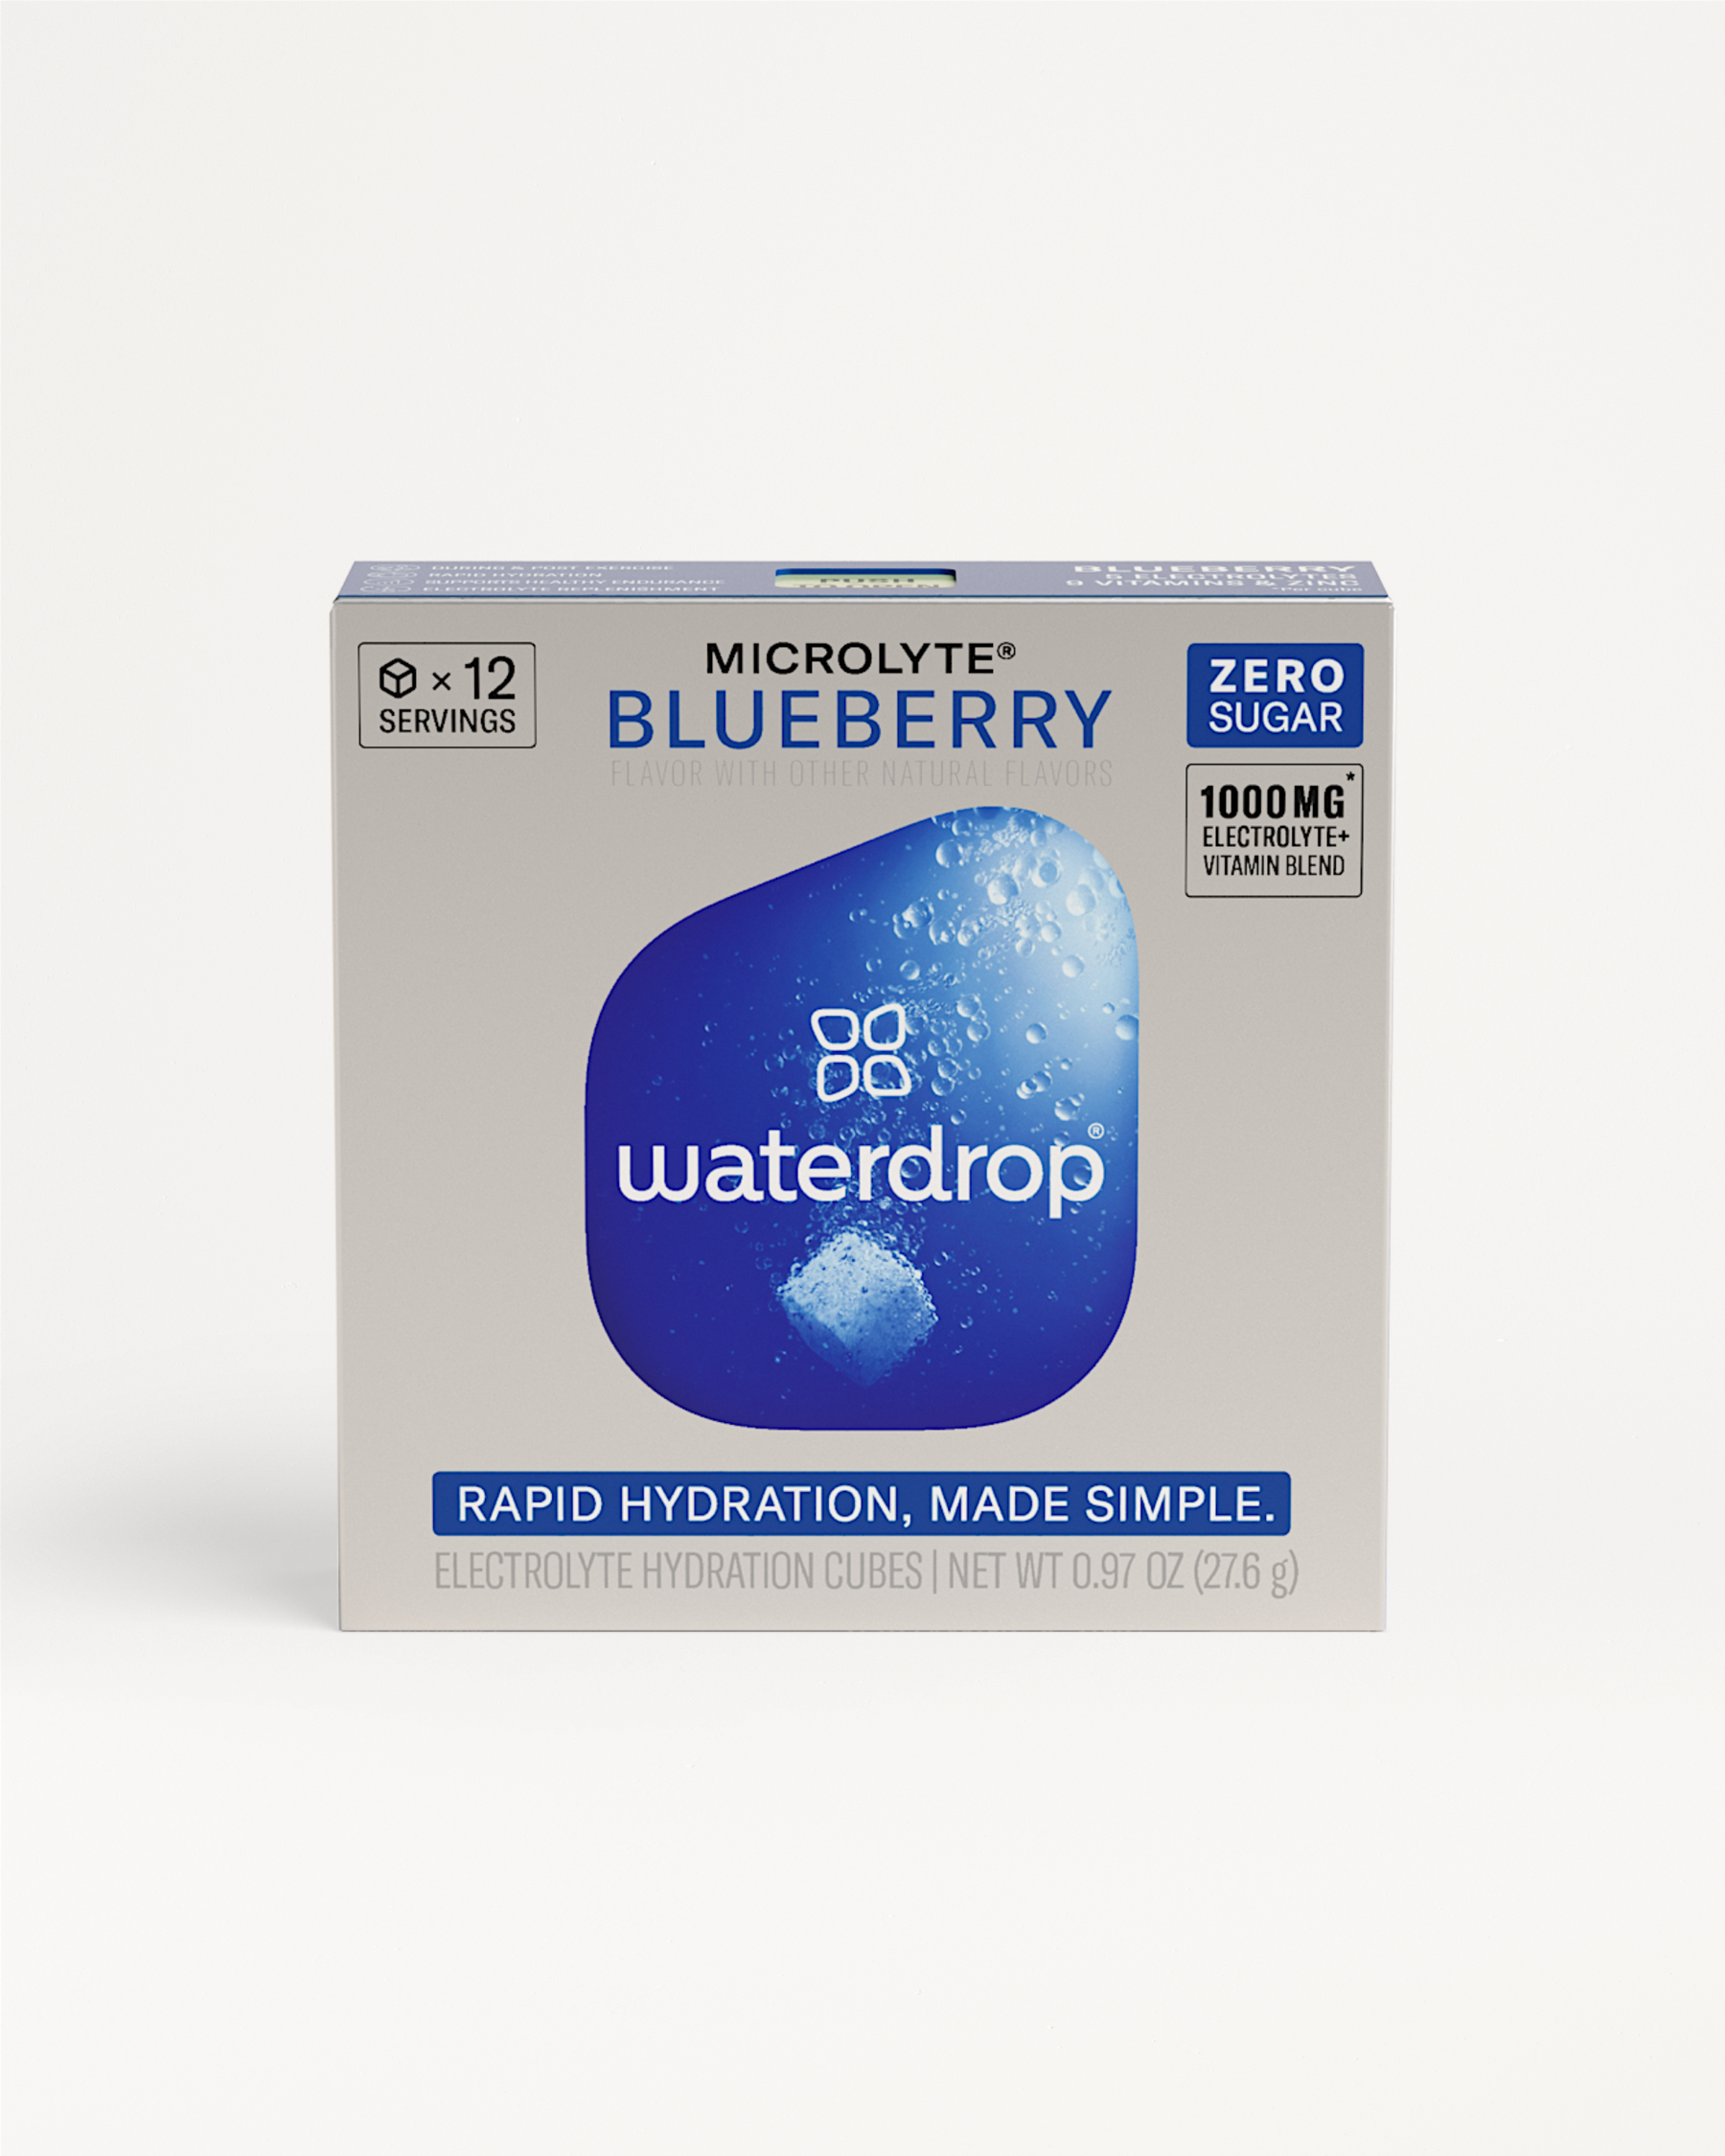 BLUEBERRY Microlyte: Order now | waterdrop®